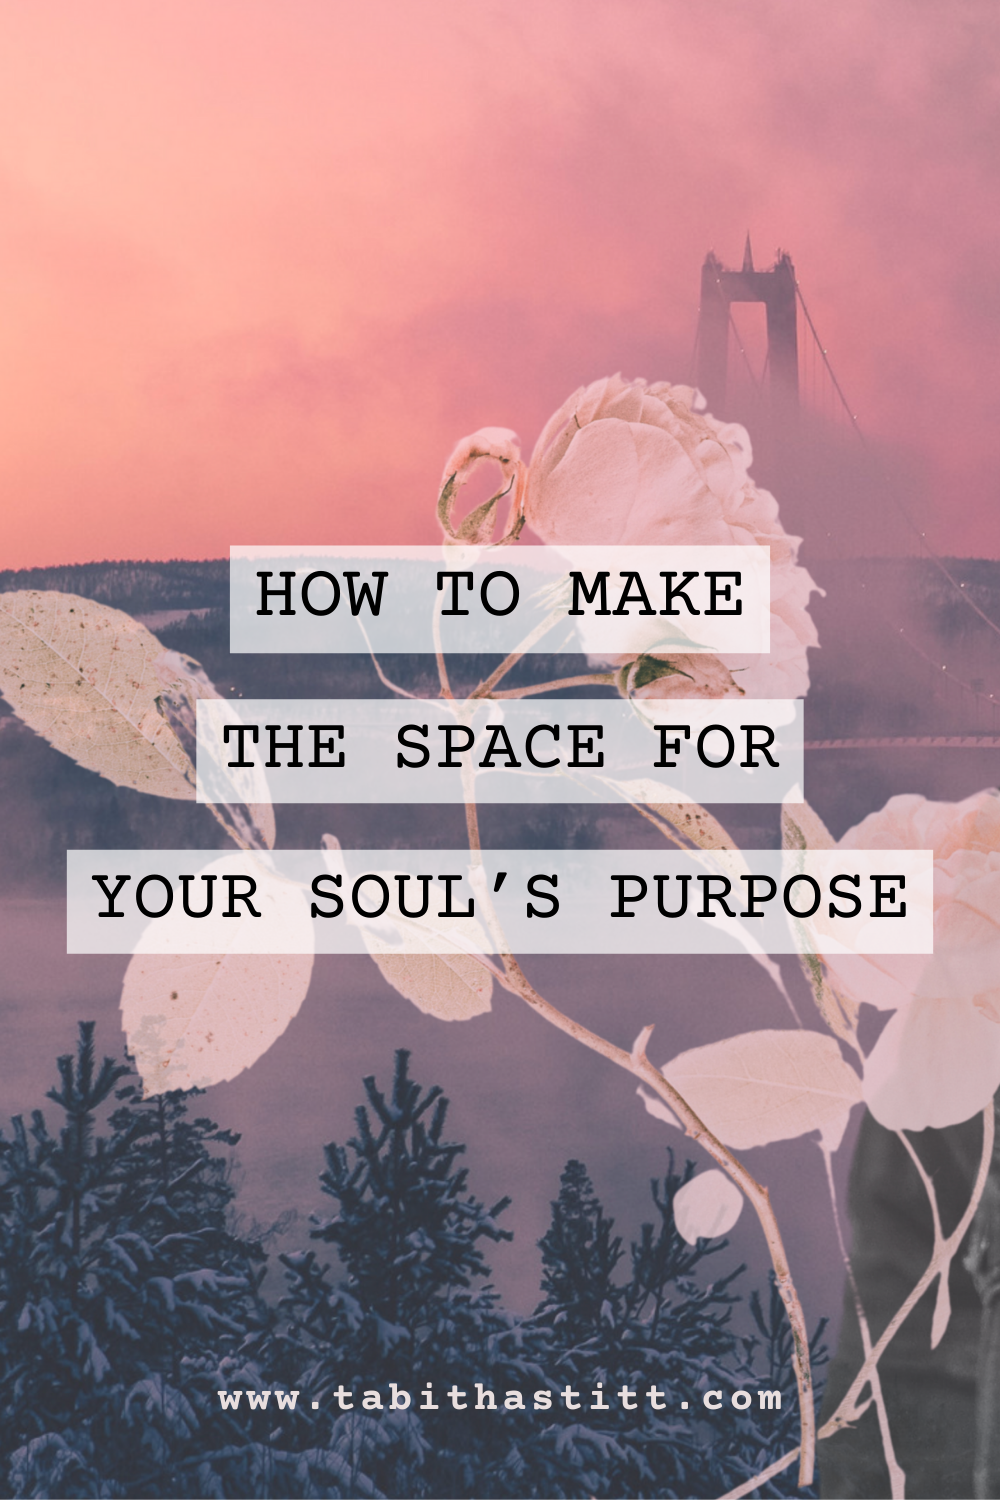 How to Make The Space for Your Soul's Purpose Showing Pink Flowers for Softness and Allowing